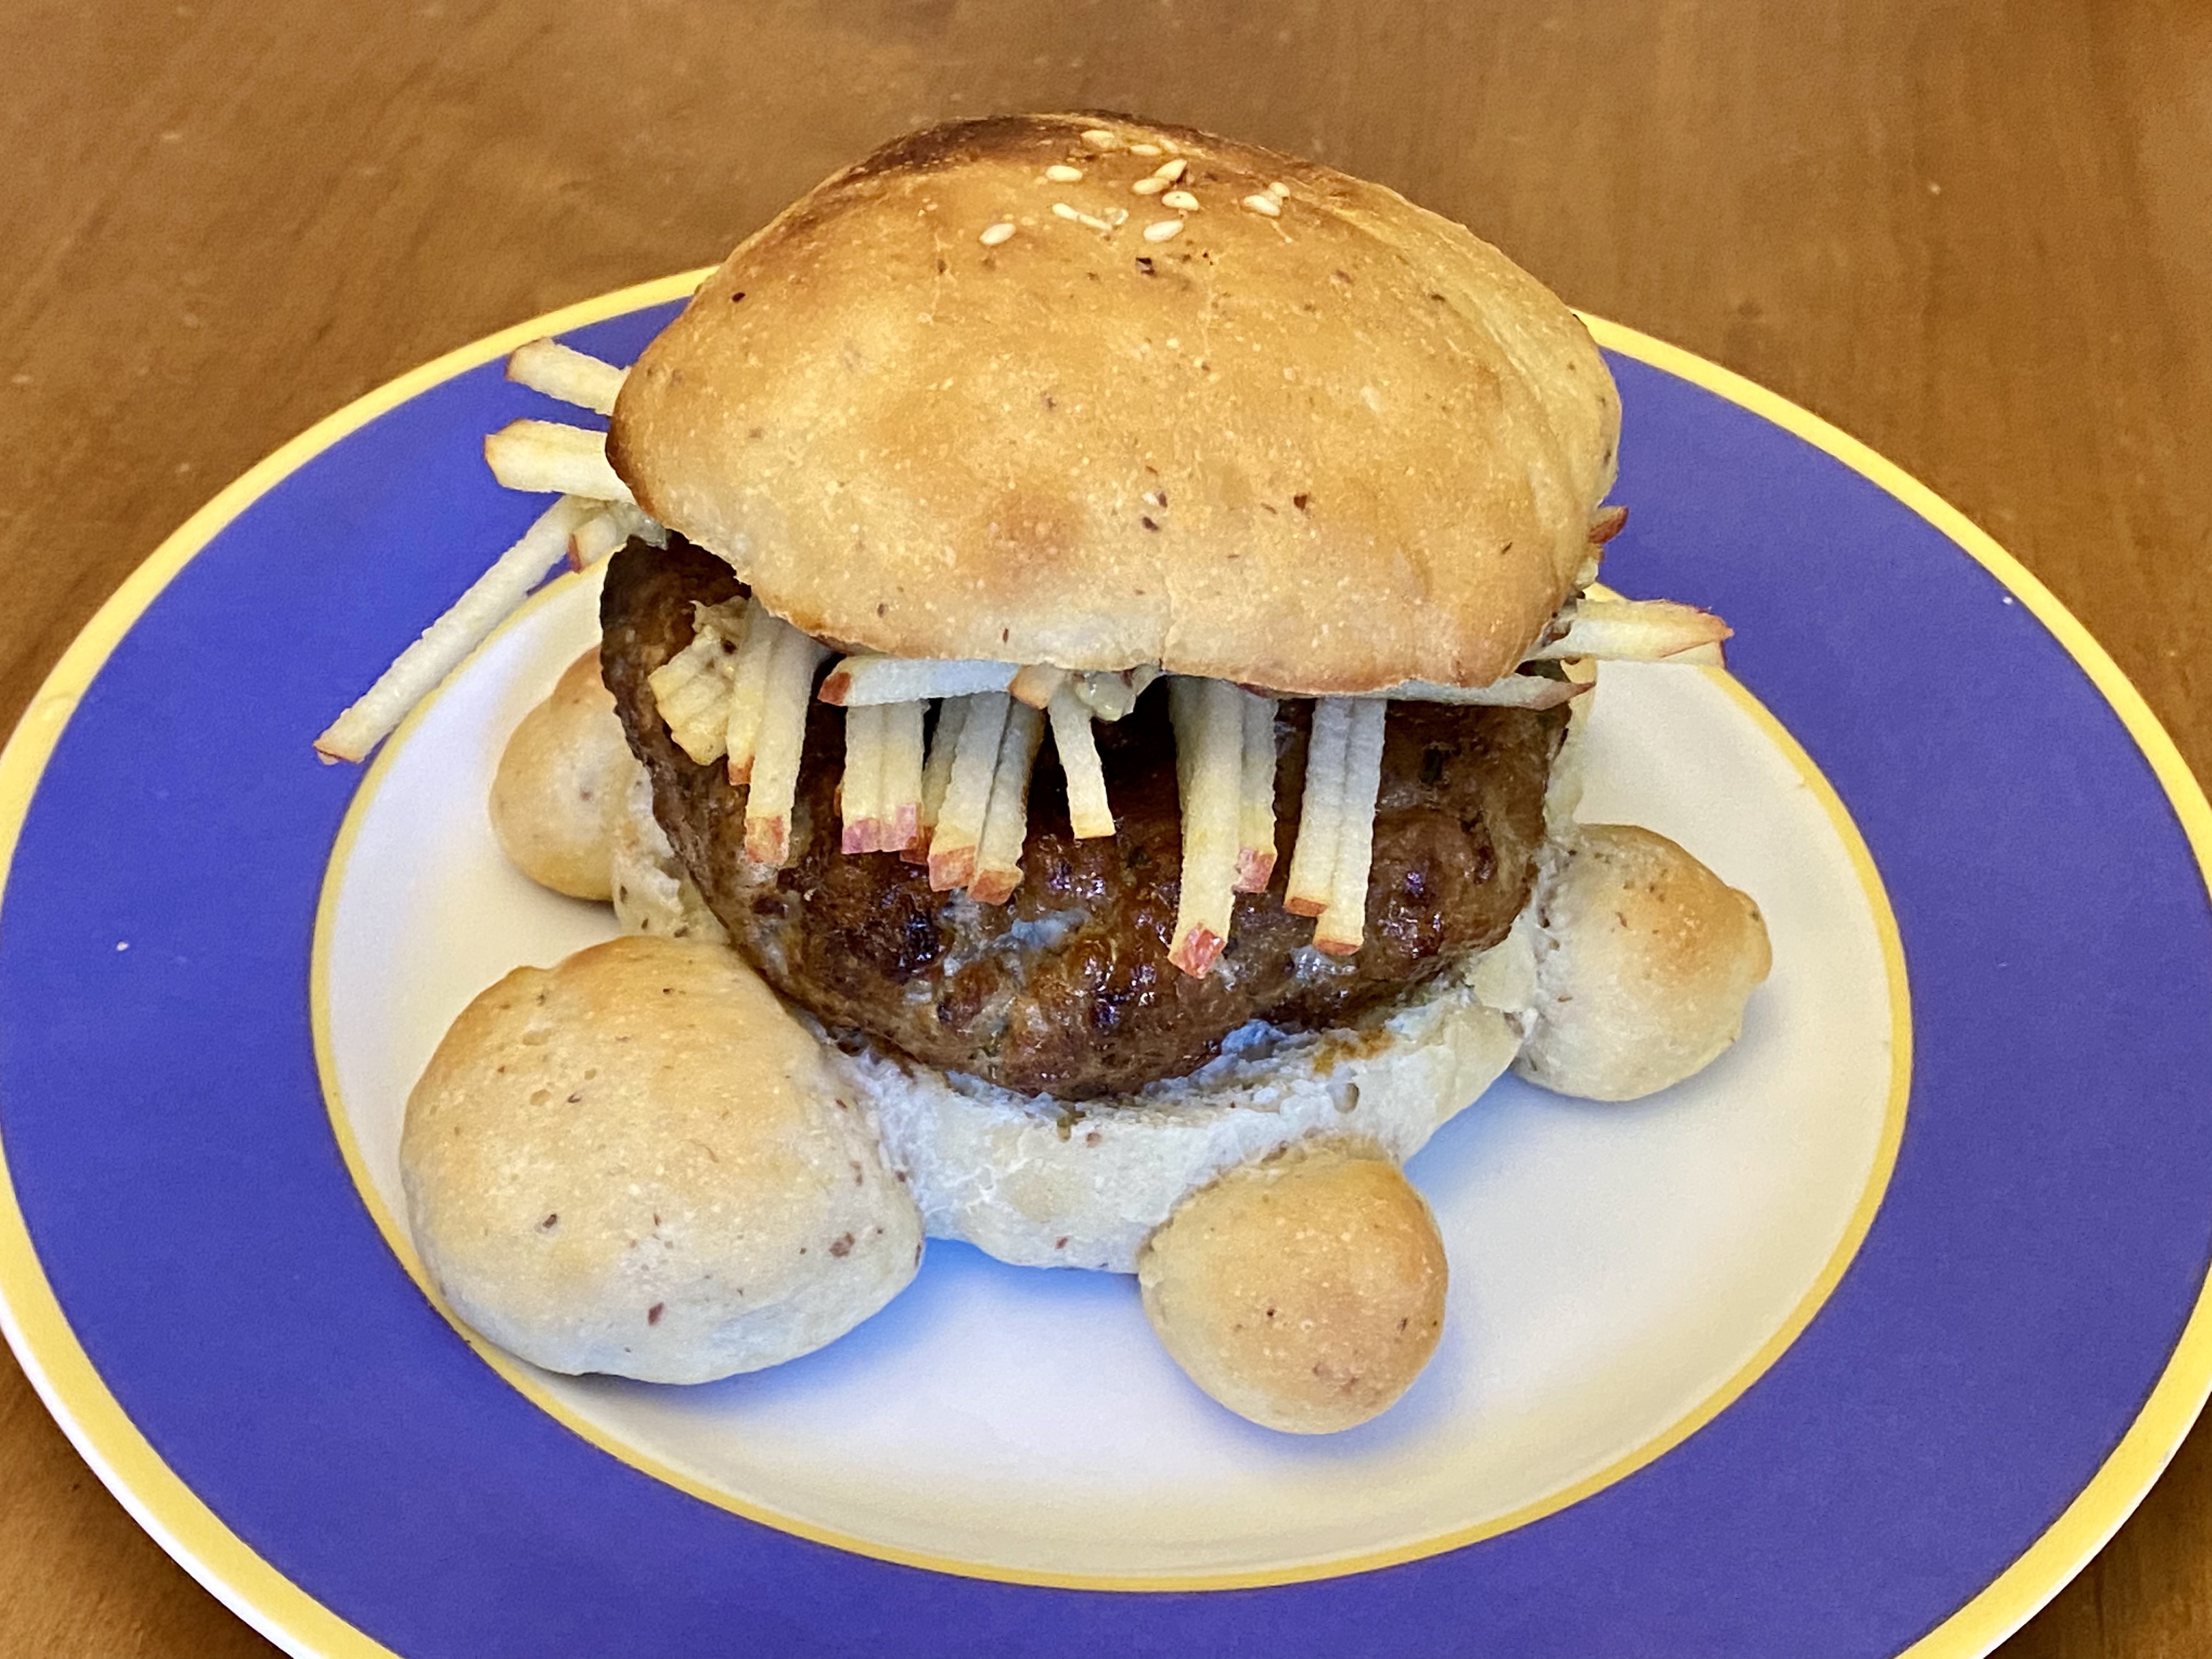 A hamburger topped by a mound of matchstick-shaped shredded apple on a lightly toasted bun that's the shape of a turtle.